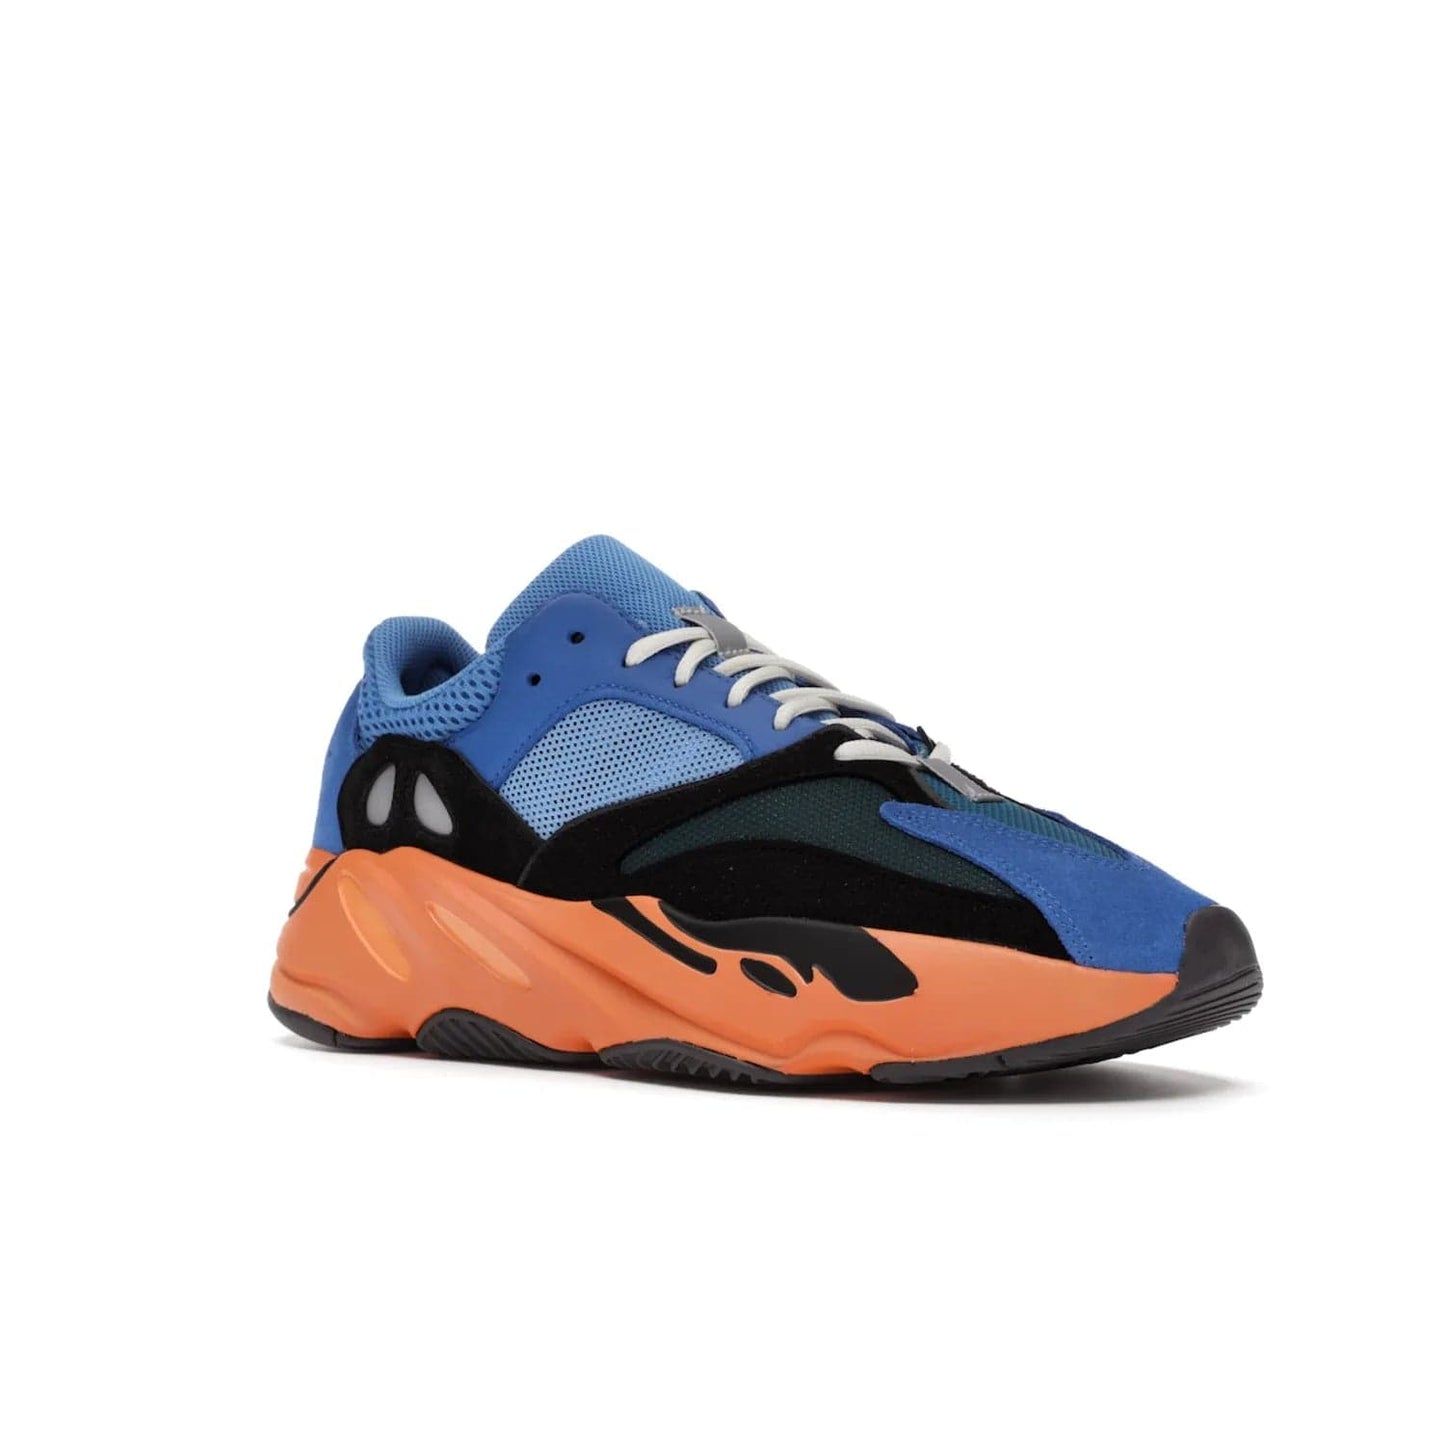 adidas Yeezy Boost 700 Bright Blue - Image 5 - Only at www.BallersClubKickz.com - Iconic sneaker style meets vibrant colour with the adidas Yeezy Boost 700 Bright Blue. Reflective accents, turquoise and teal panels, bright orange midsole and black outsole make for a bold release. April 2021.